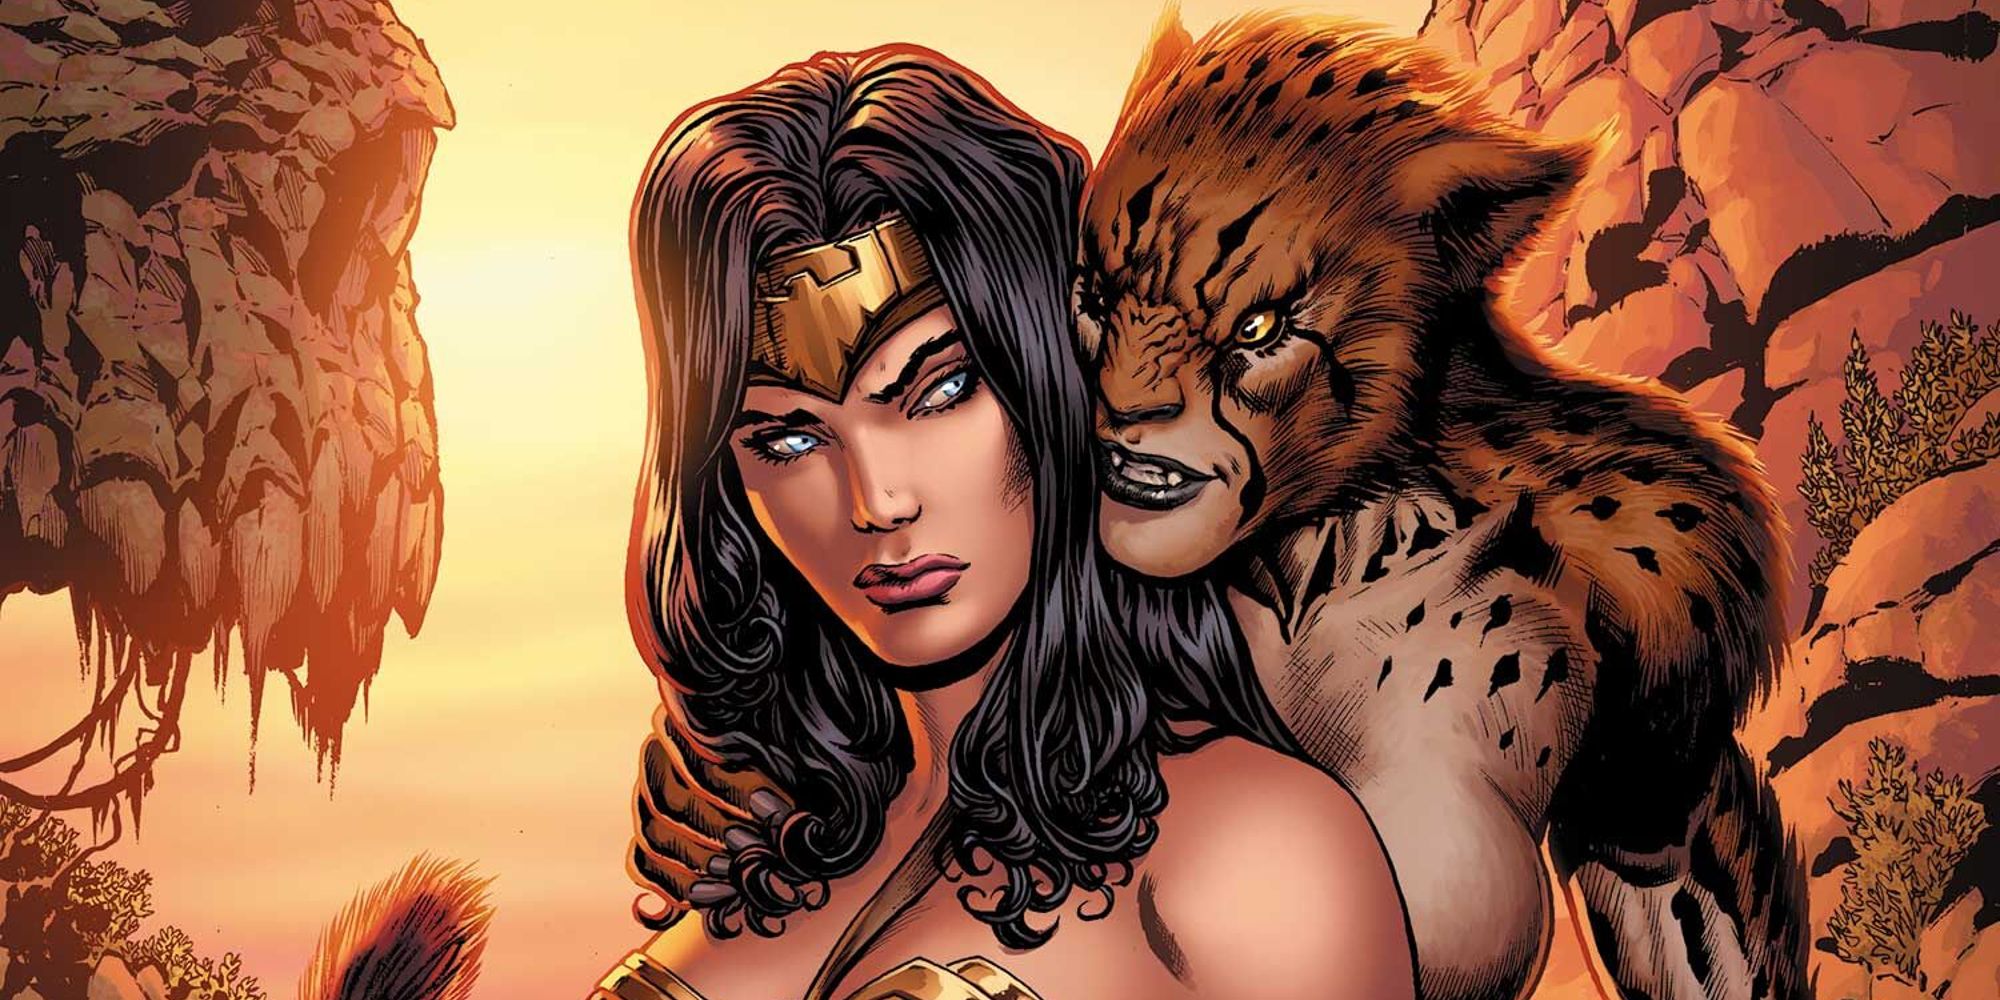 Wonder Woman and Cheetah at odds with each other in Wonder Woman comics